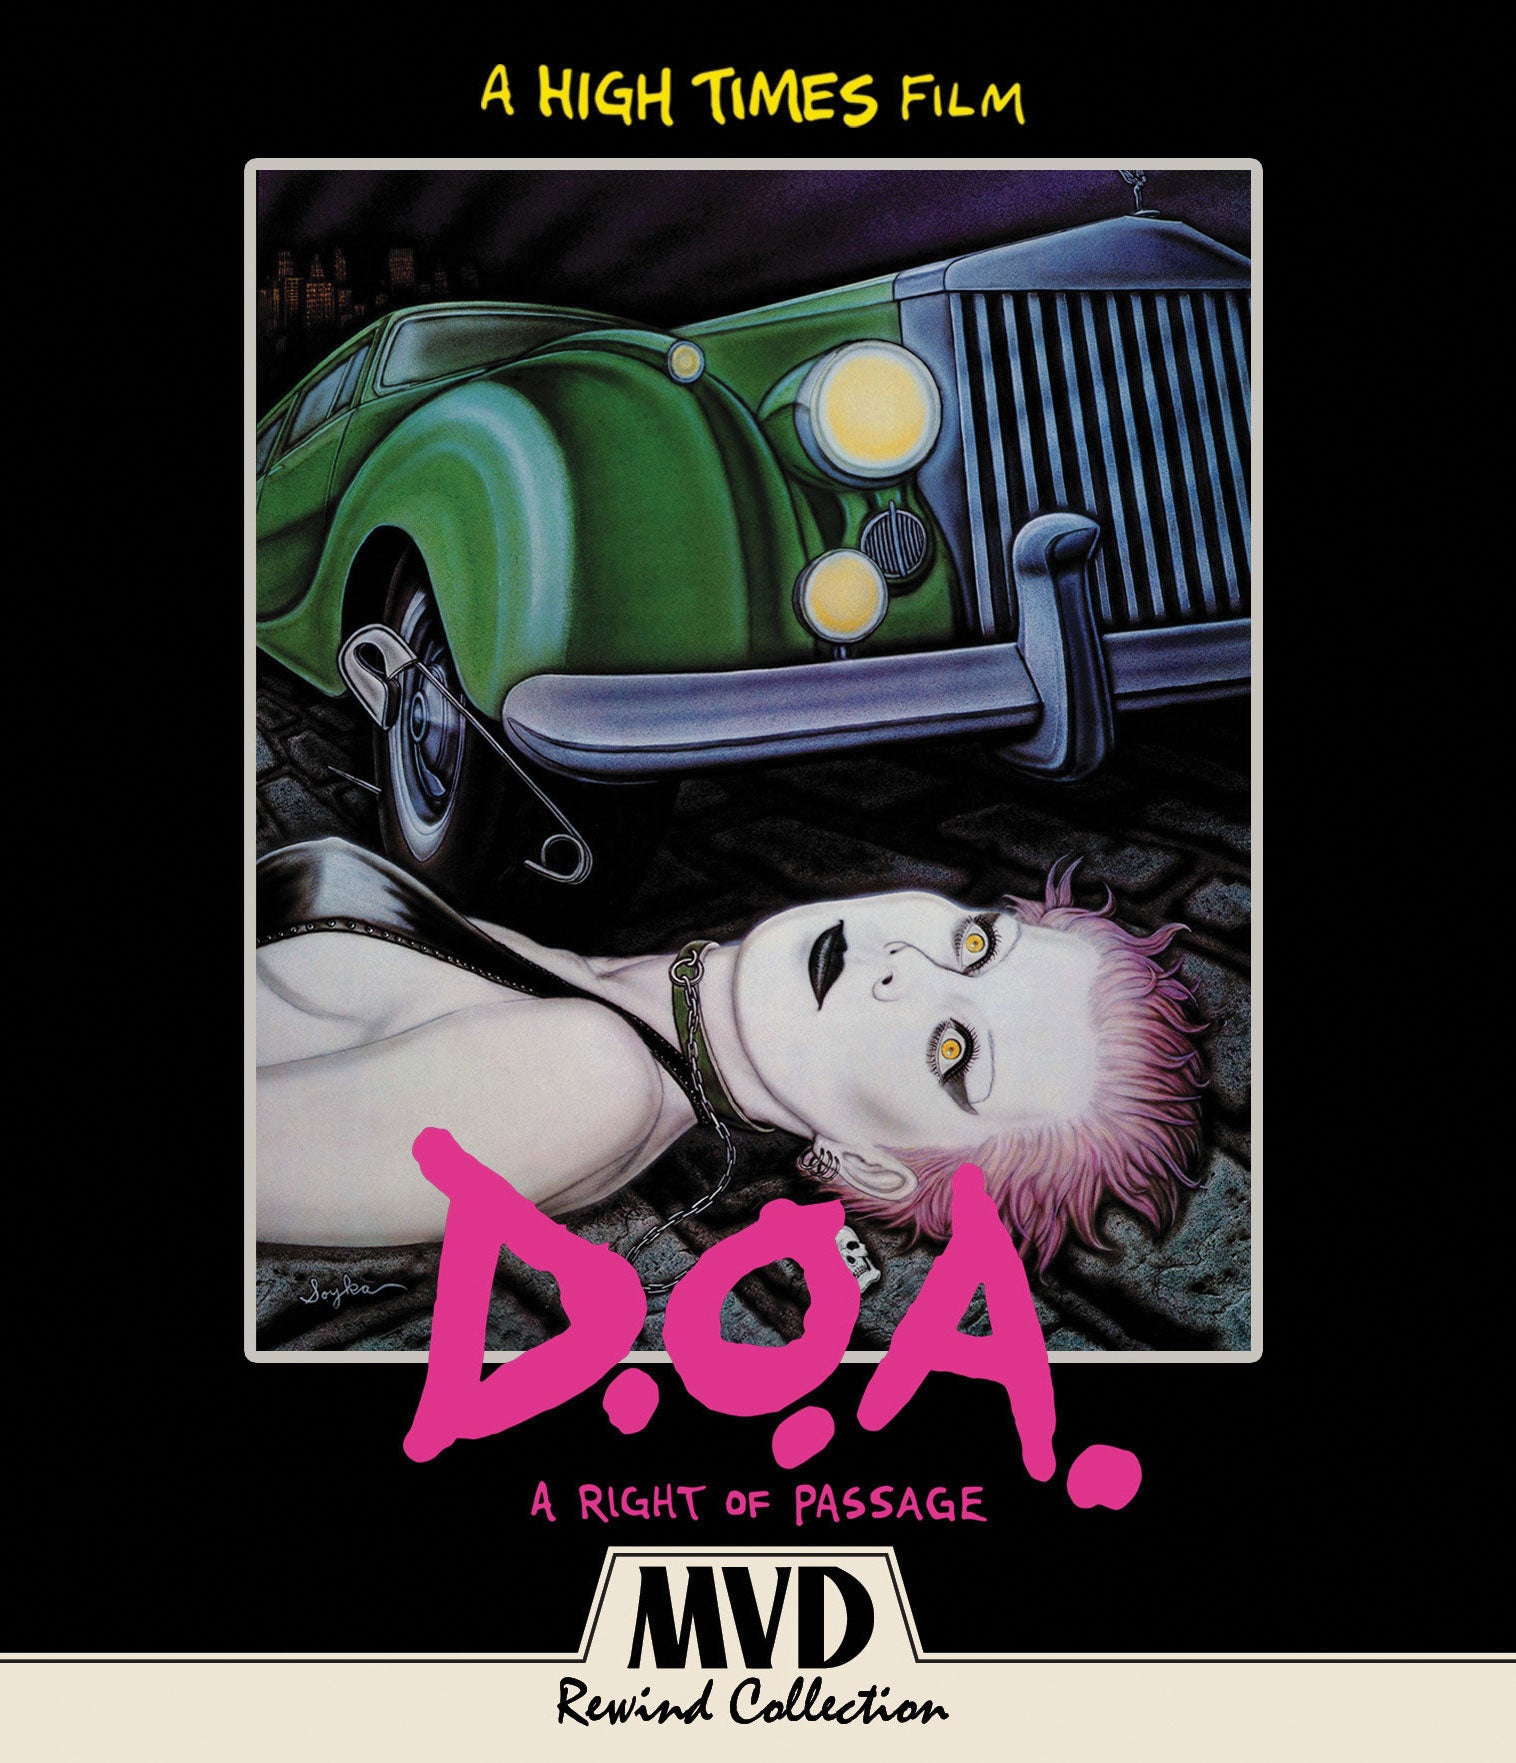 D.O.A.: A RIGHT OF PASSAGE BLU-RAY